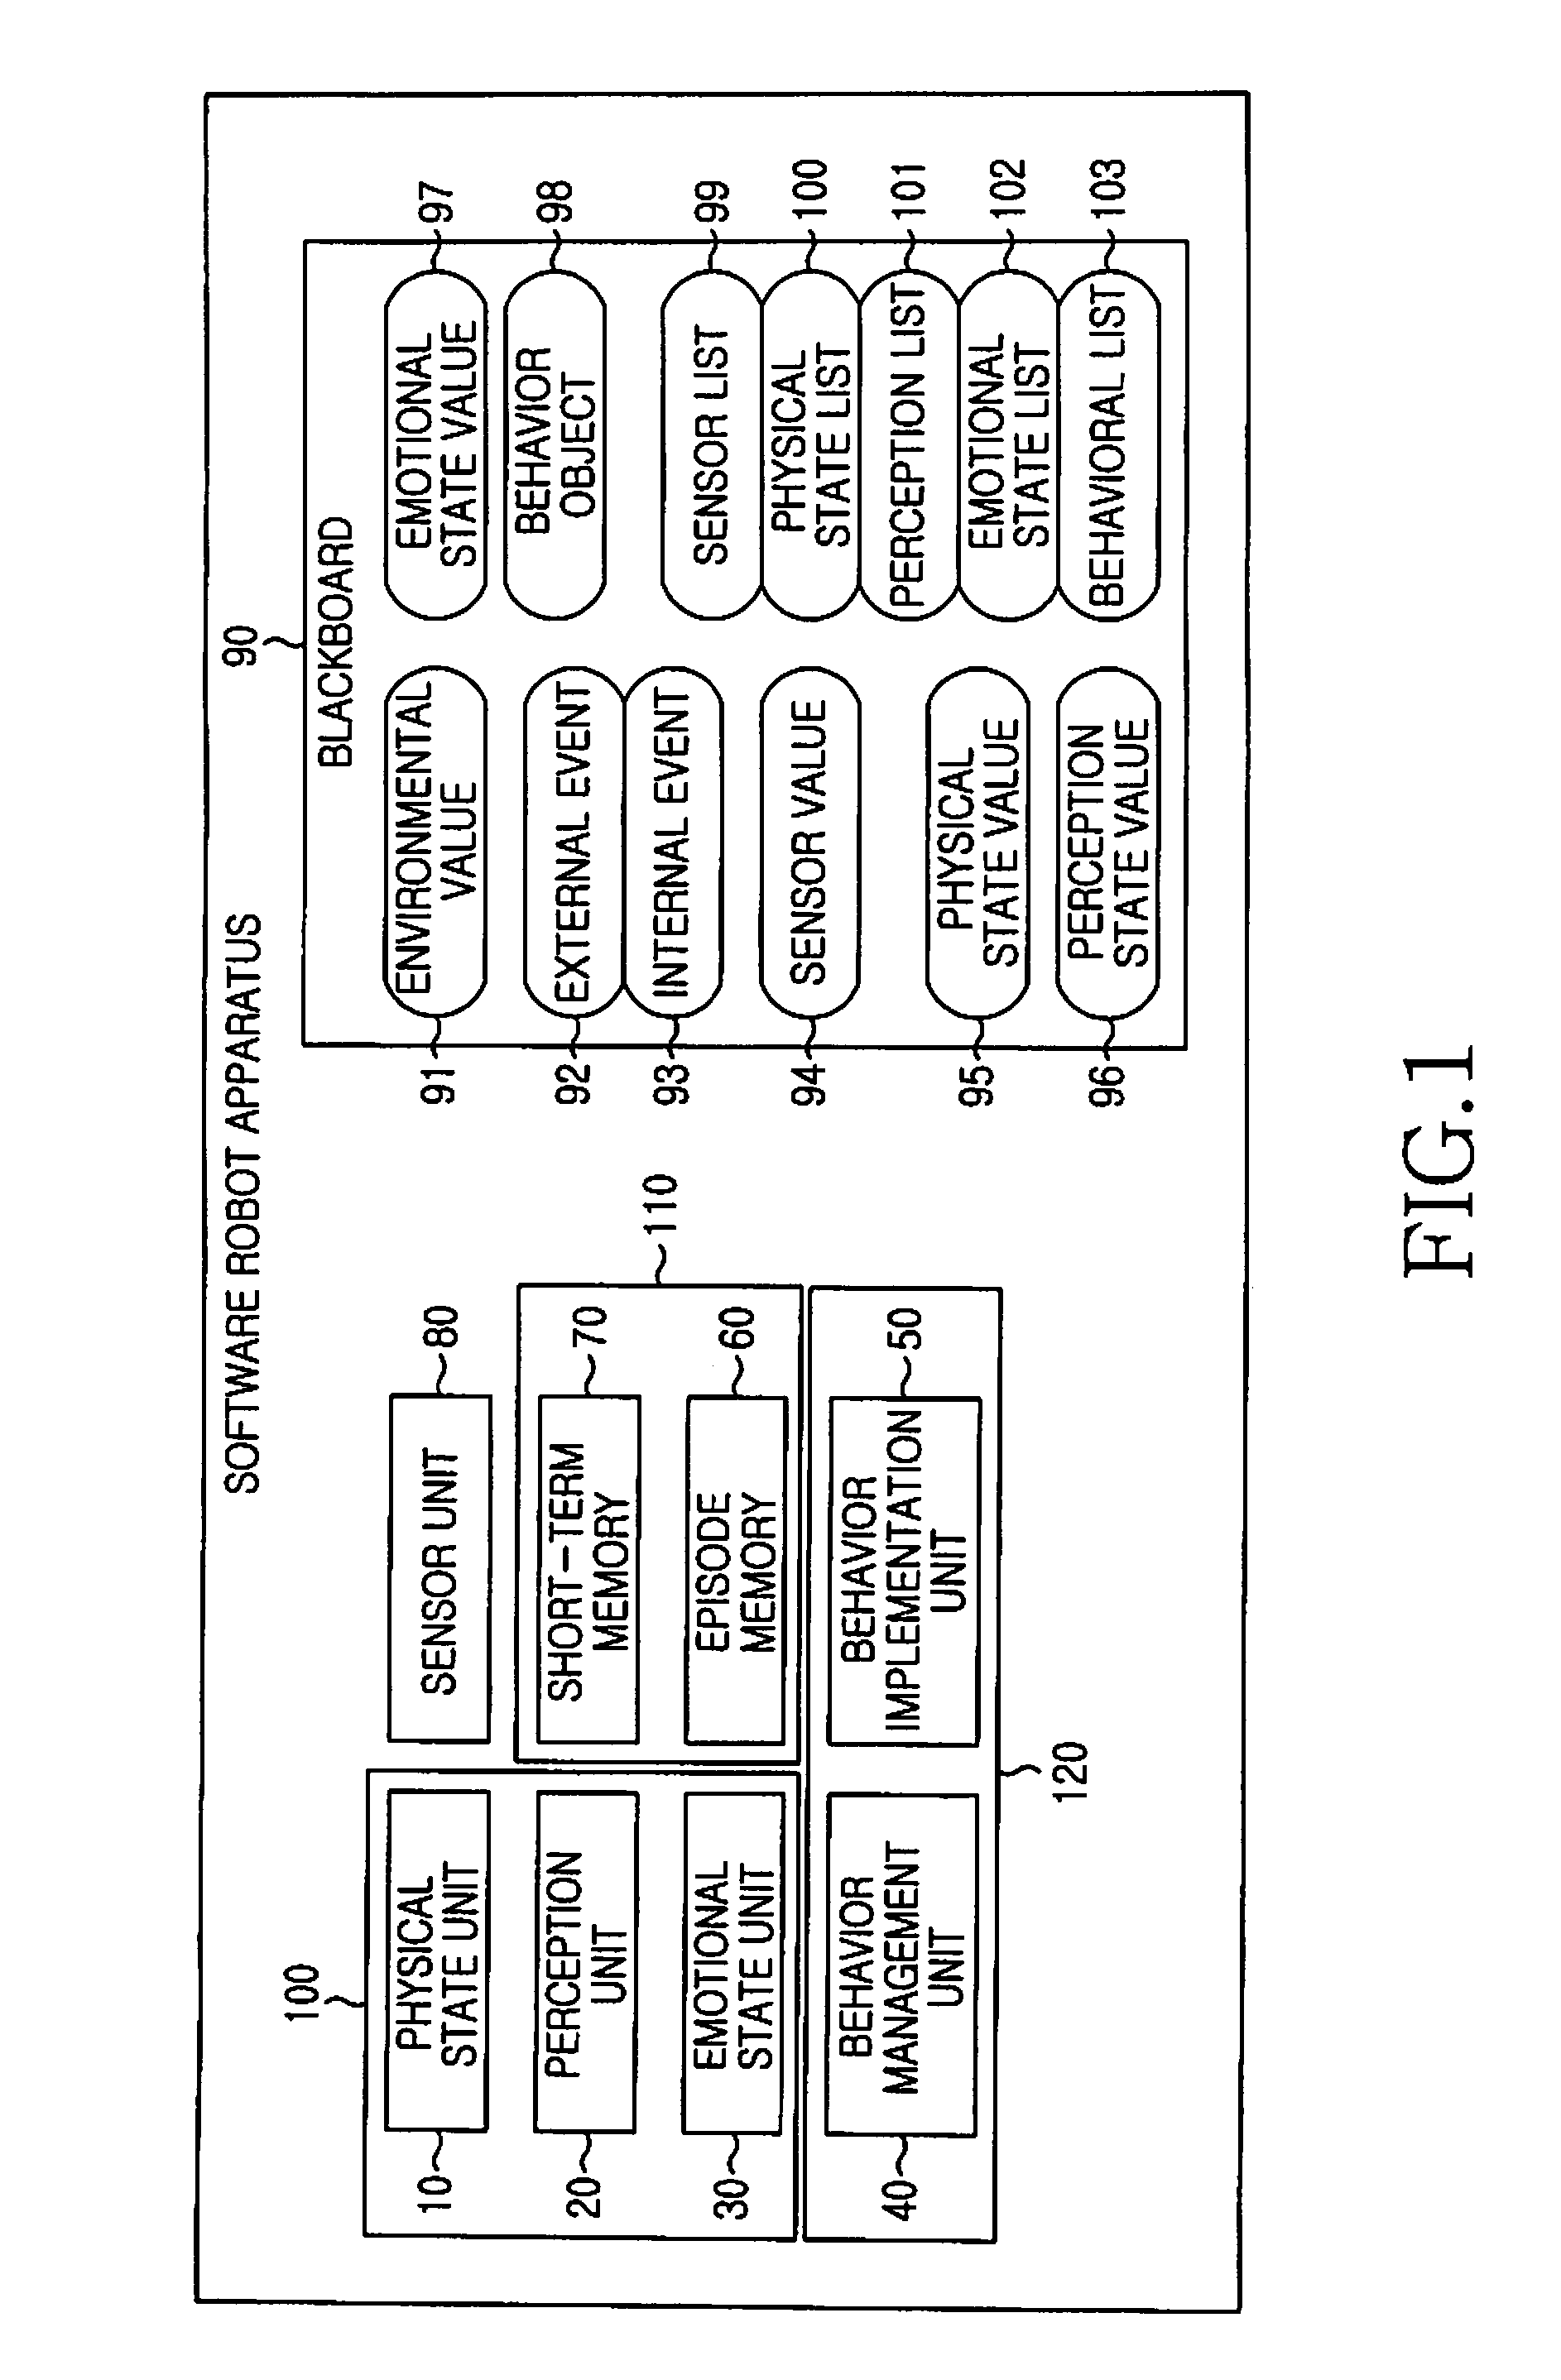 Apparatus and method for expressing behavior of software robot